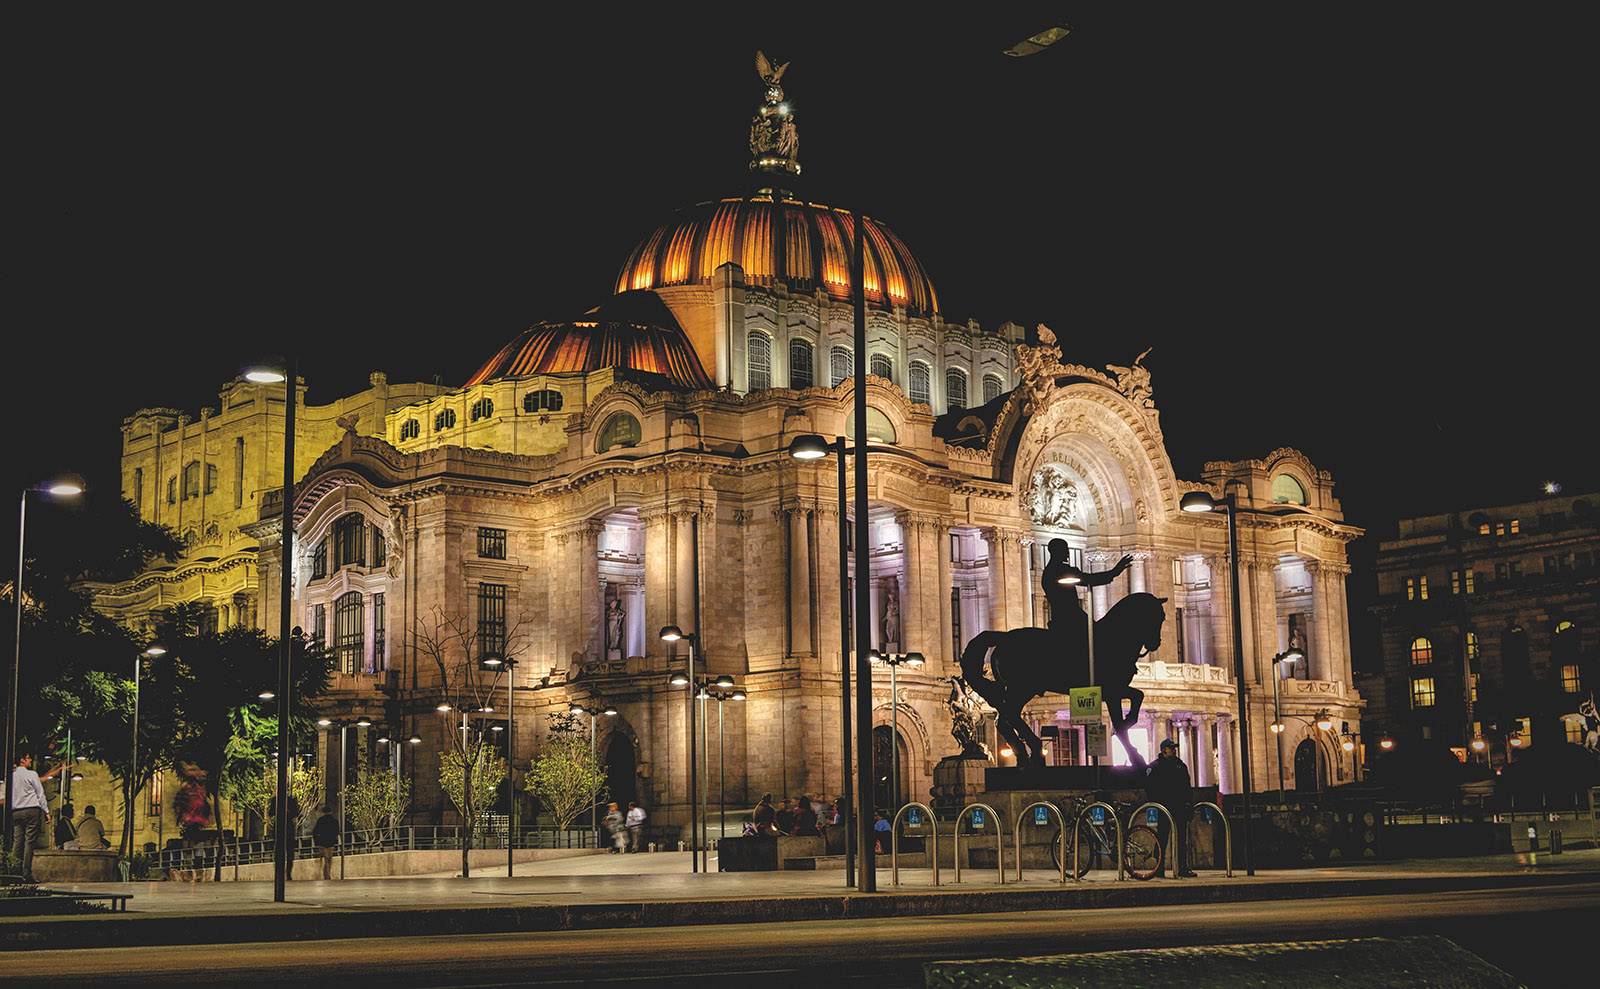 baroque building lit up at night in mexico city